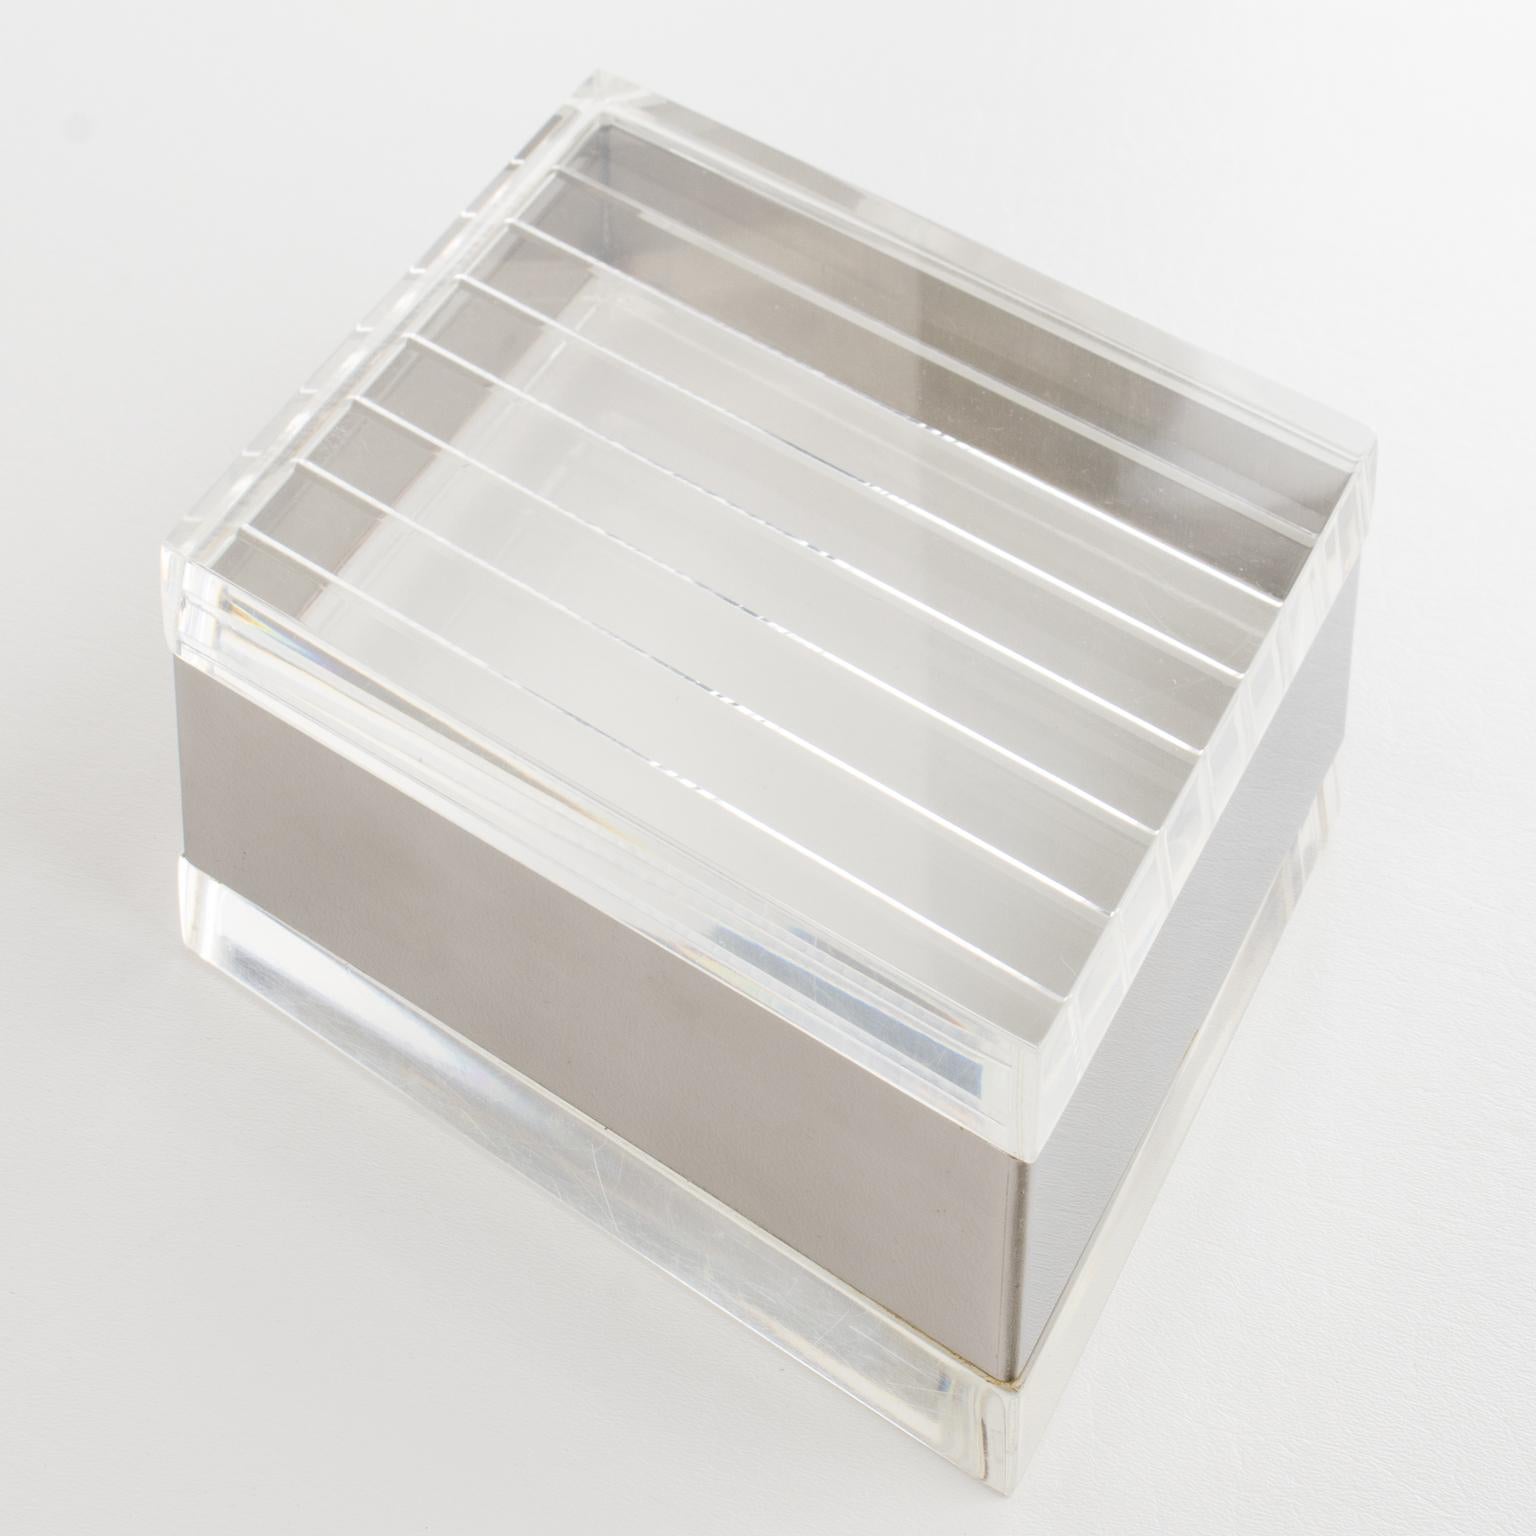 Mid-Century Modern Modernist Geometric Lucite and Chrome Metal Decorative Box, France 1970s For Sale